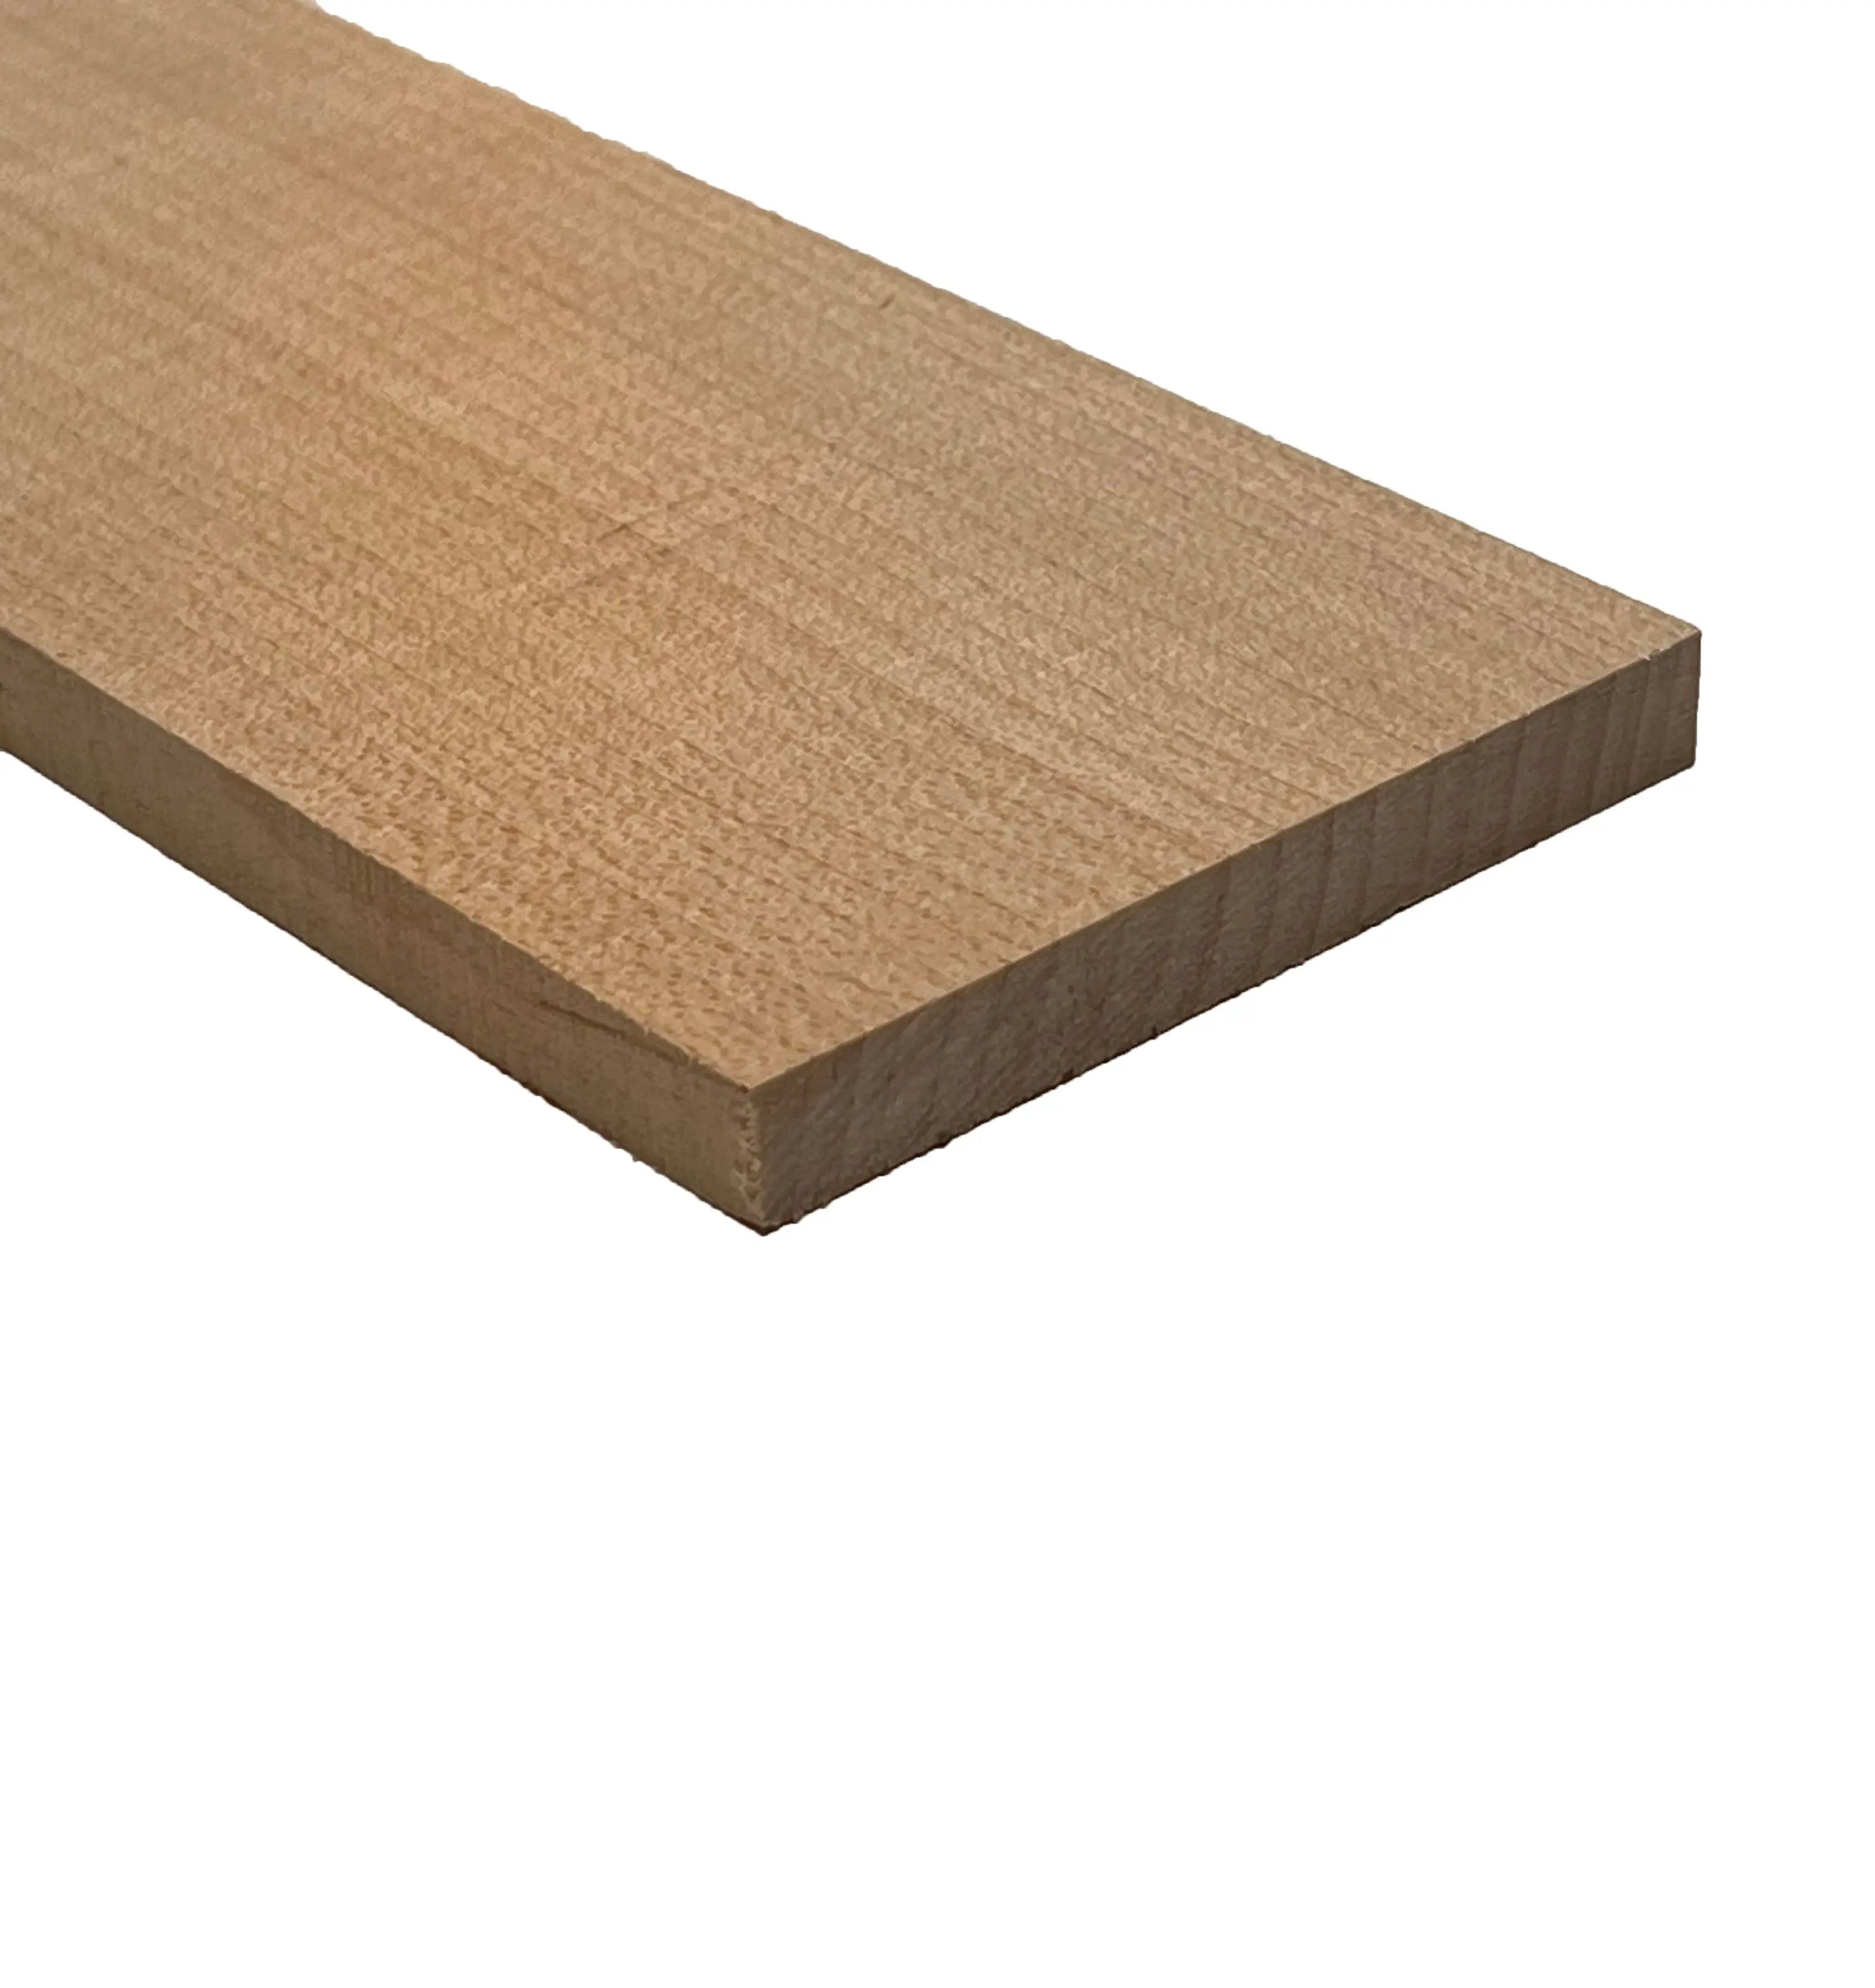 Basswood Sheet 3/8in x 3in x 24in (Pack of 5)